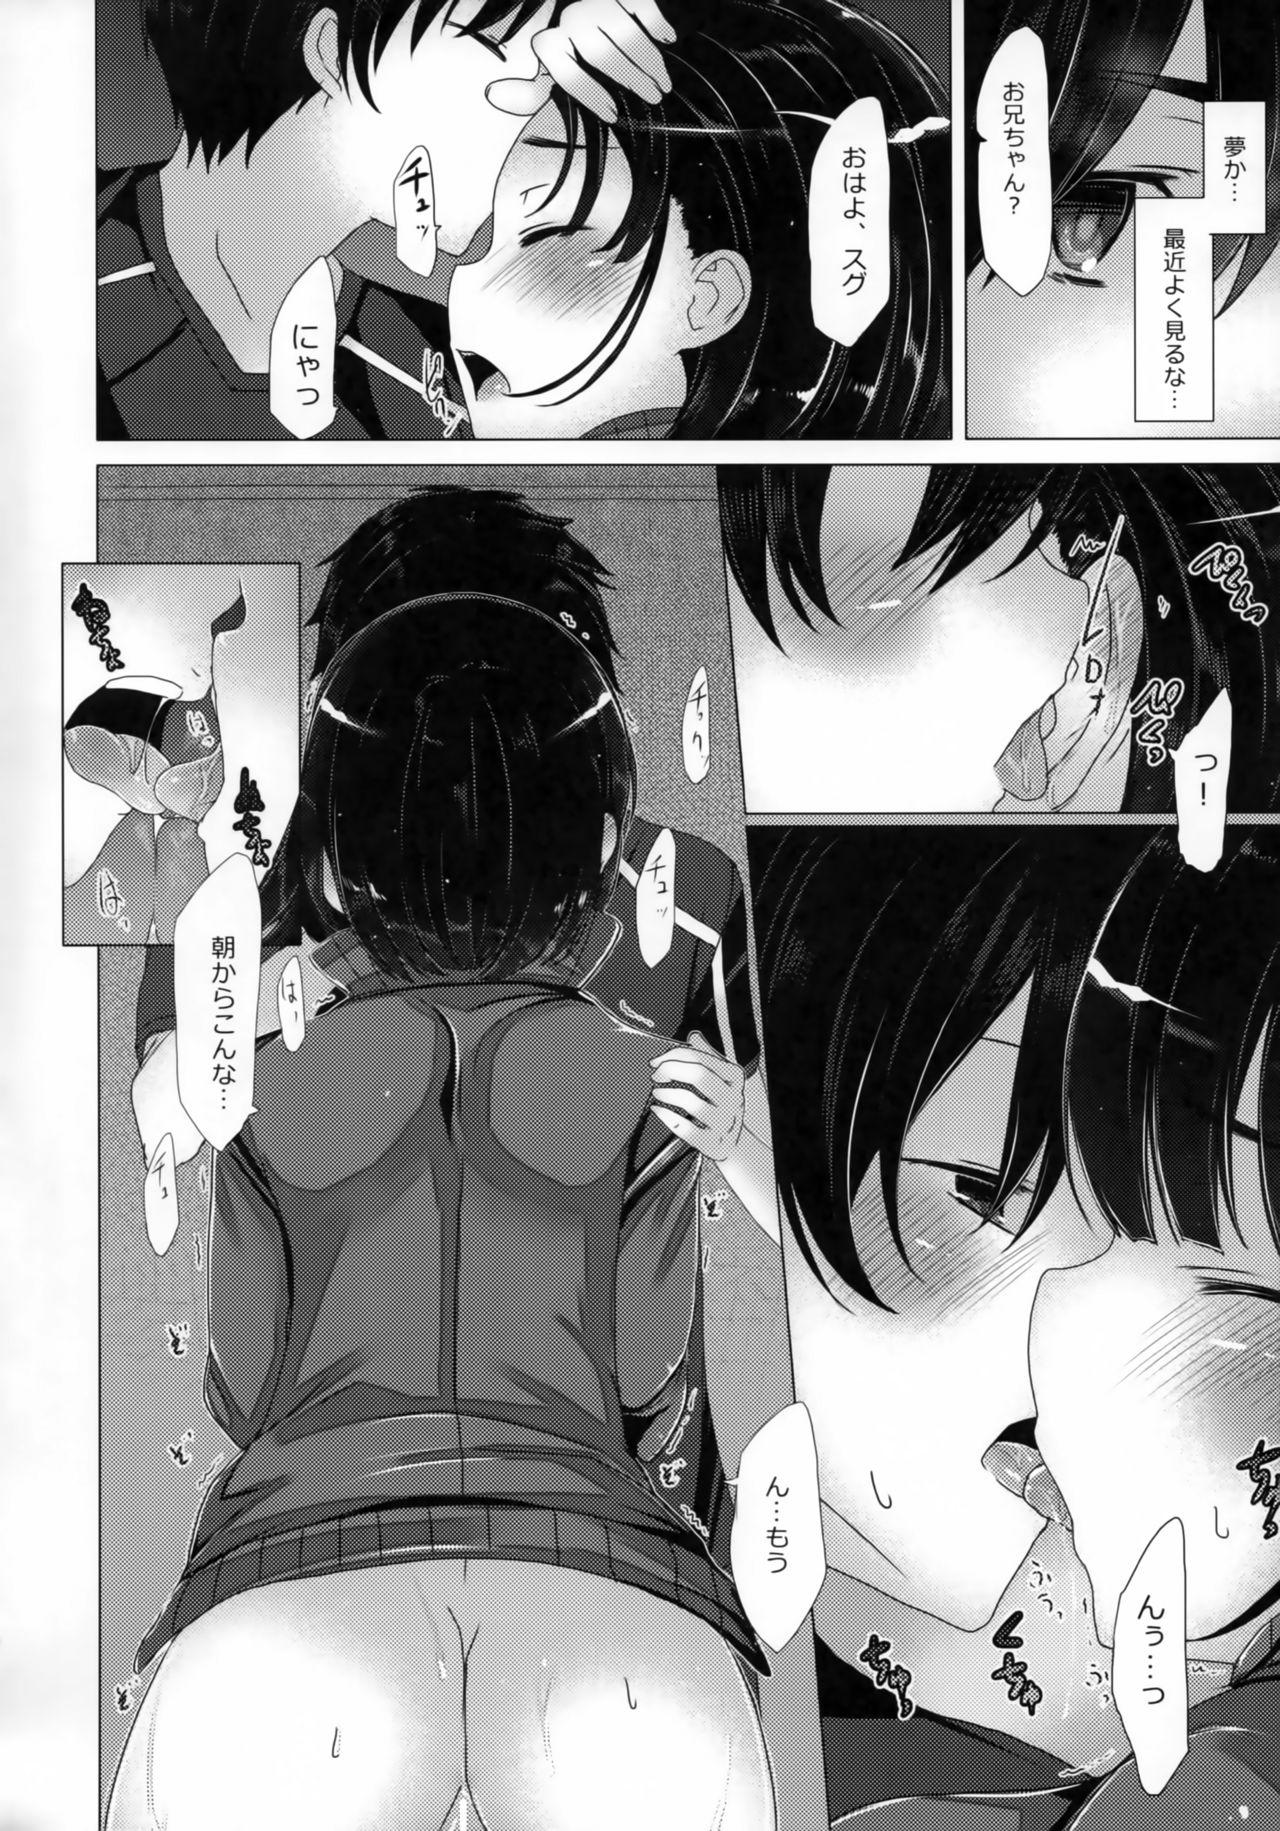 Suck Reach out Your hands - Sword art online Hard Sex - Page 5